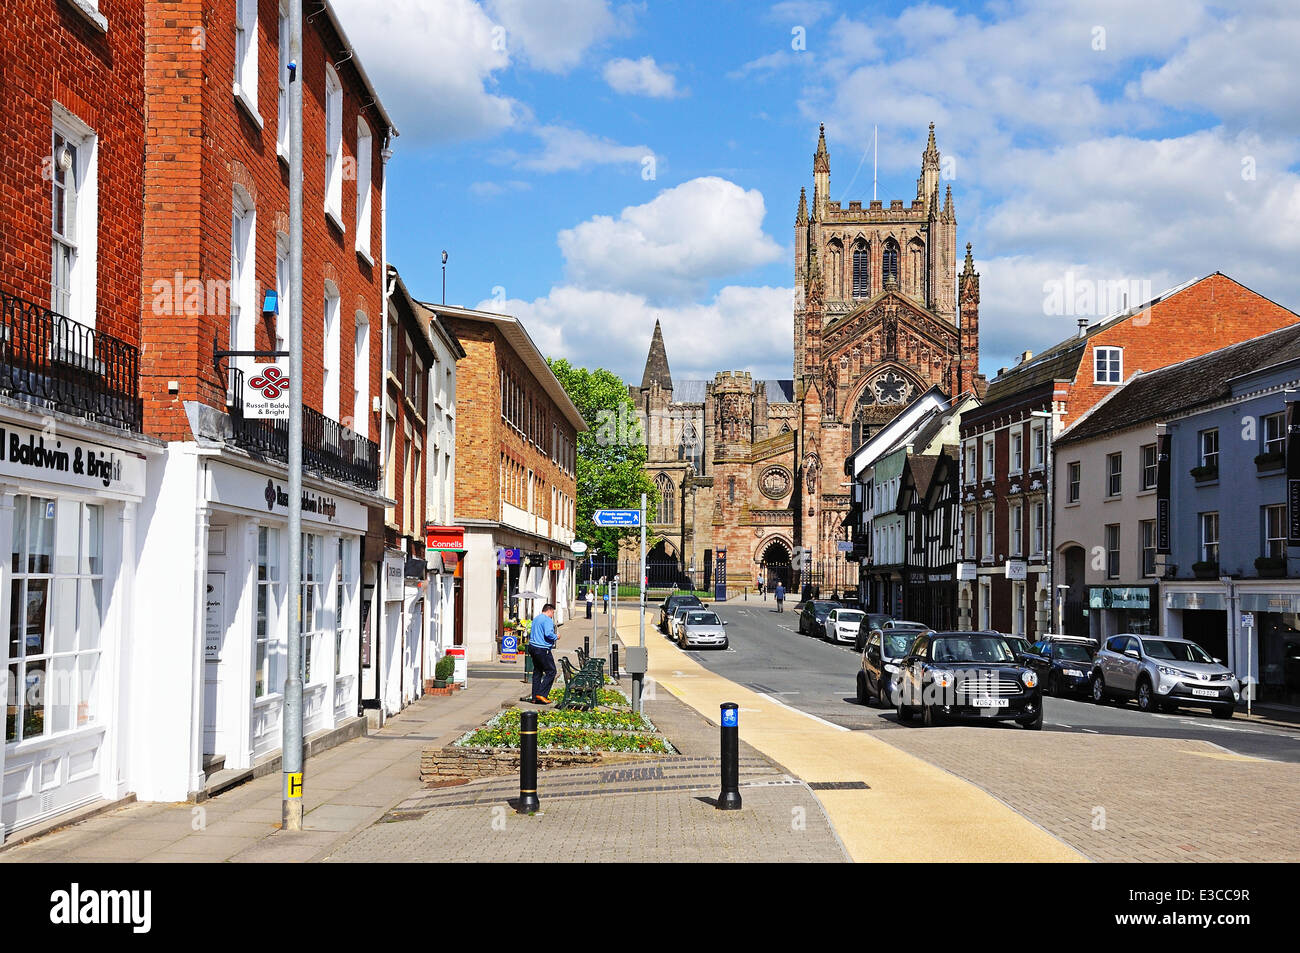 Front view of the Cathedral at the end of King Street, Hereford, Herefordshire, England, UK, Western Europe. Stock Photo